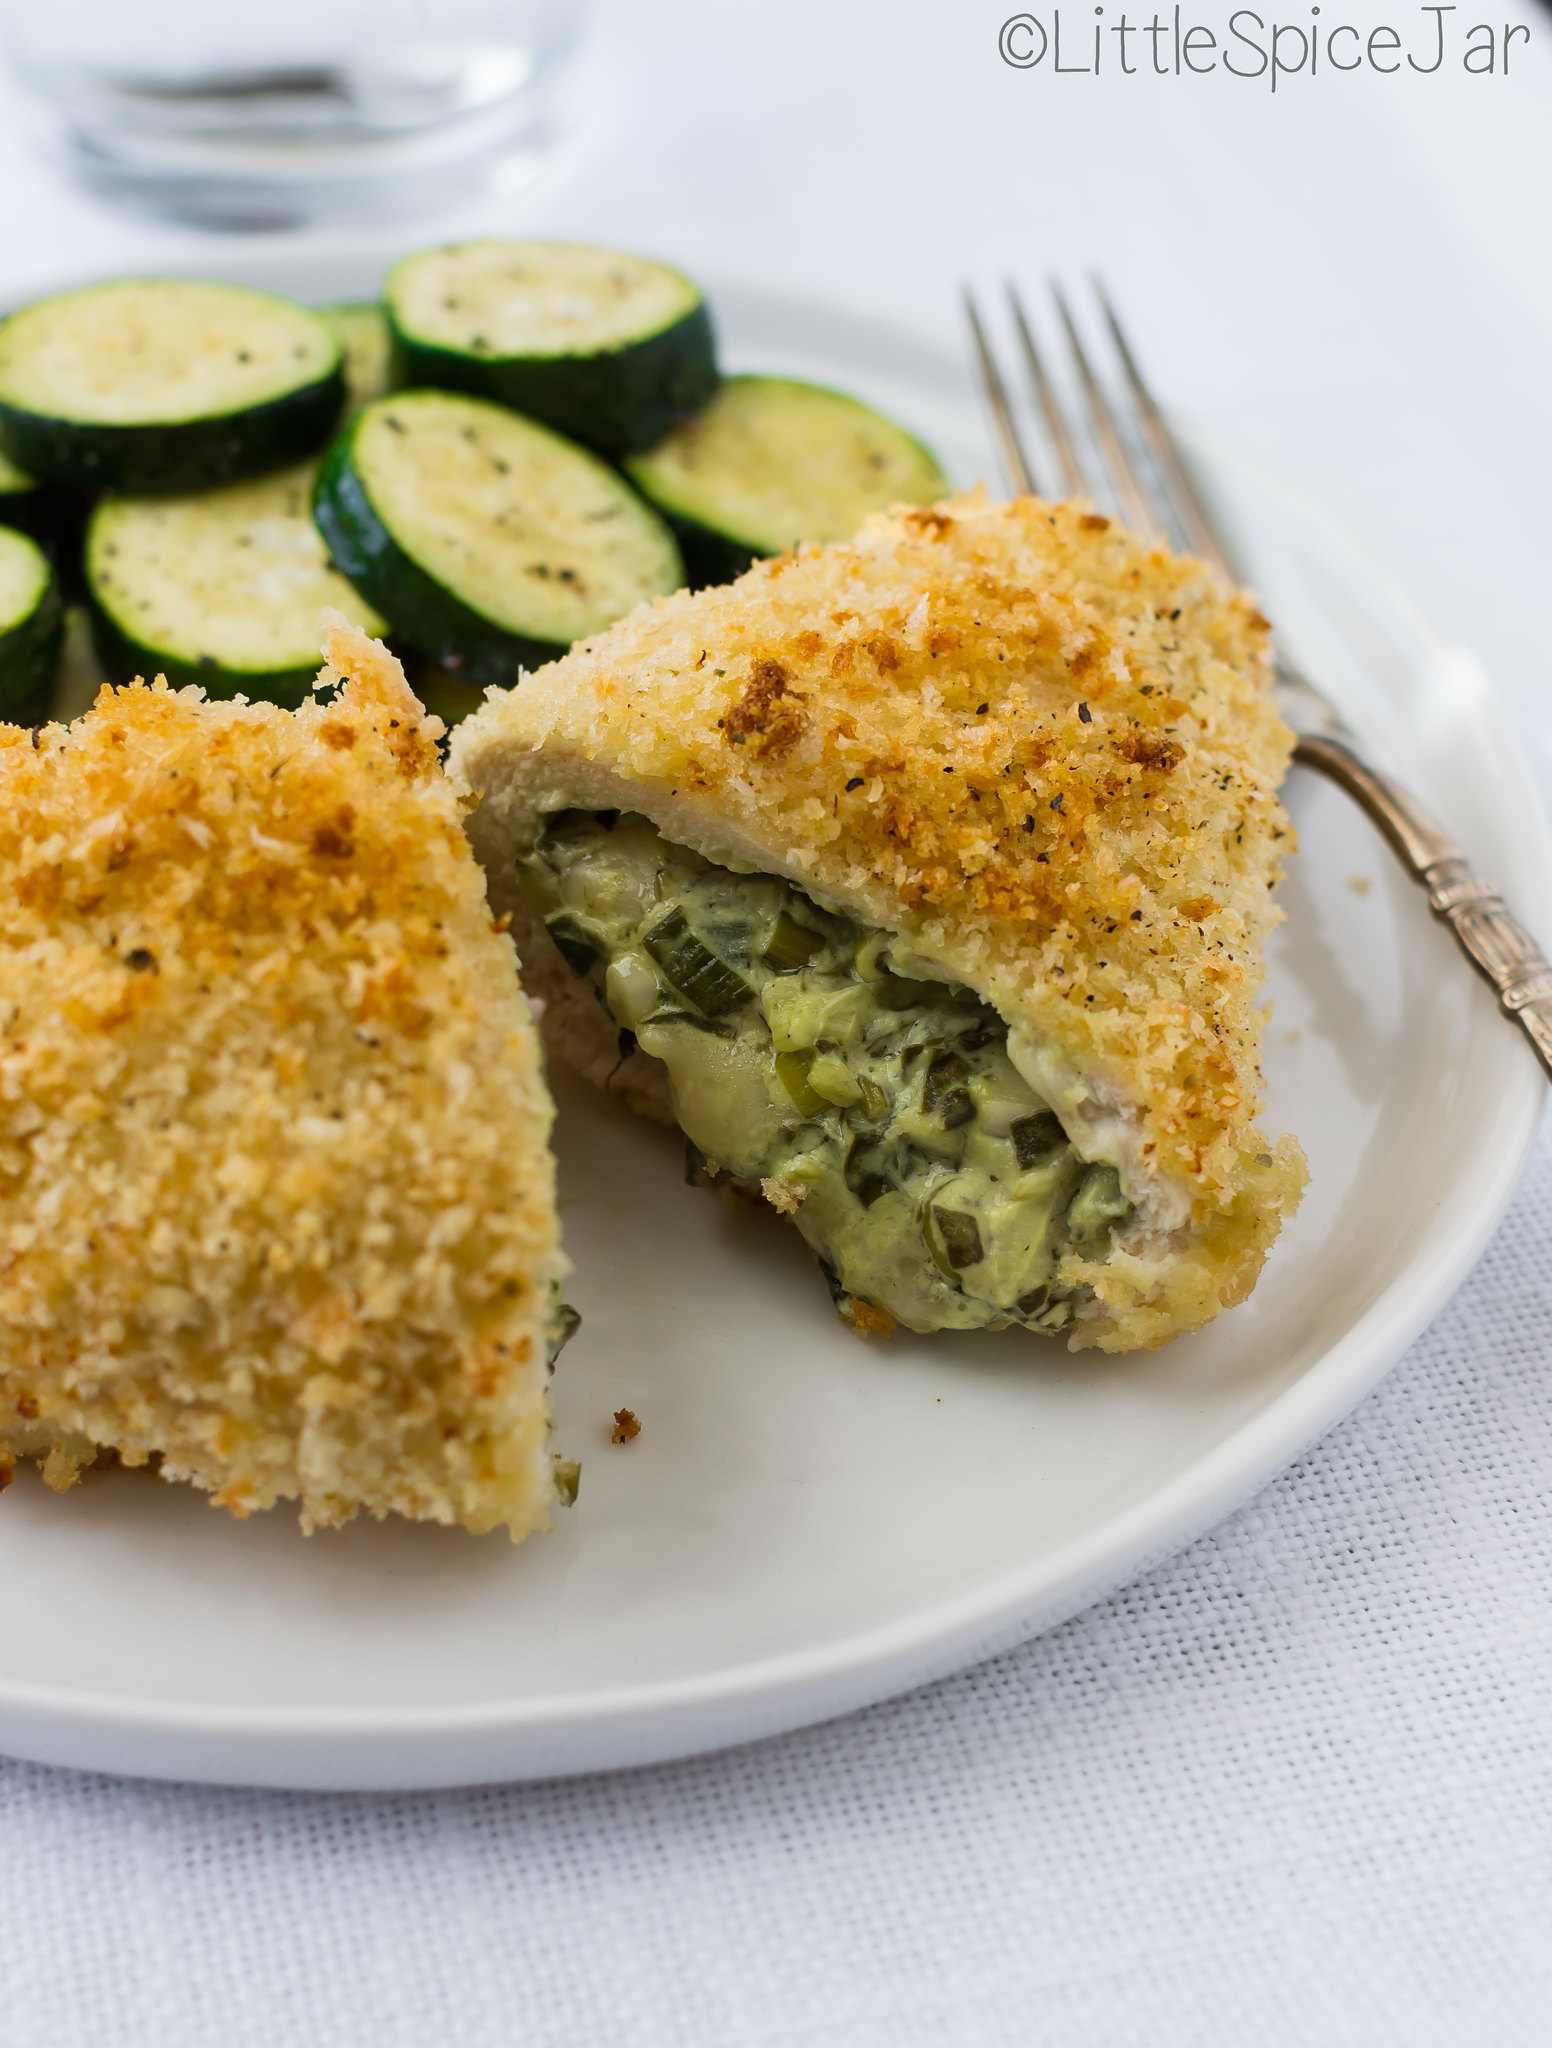 Spinach Cream Cheese Stuffed Chicken Breast -  loaded with scallions, cream cheese, and lots of spinach! #stuffedchickenbreast #chickendinner #stuffedchicken | Littlespicejar.com